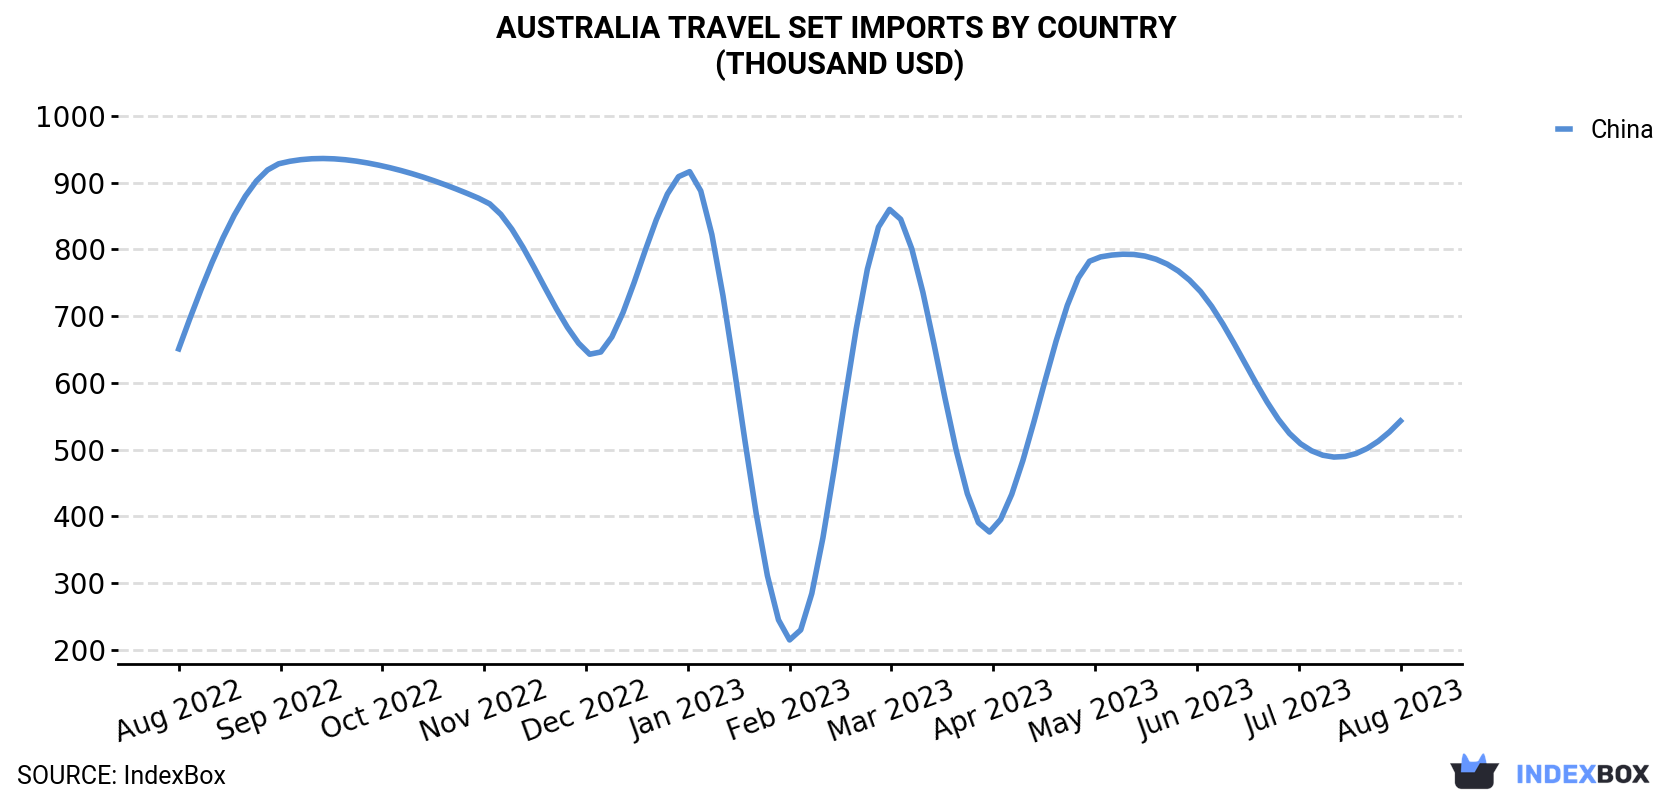 Australia Travel Set Imports By Country (Thousand USD)